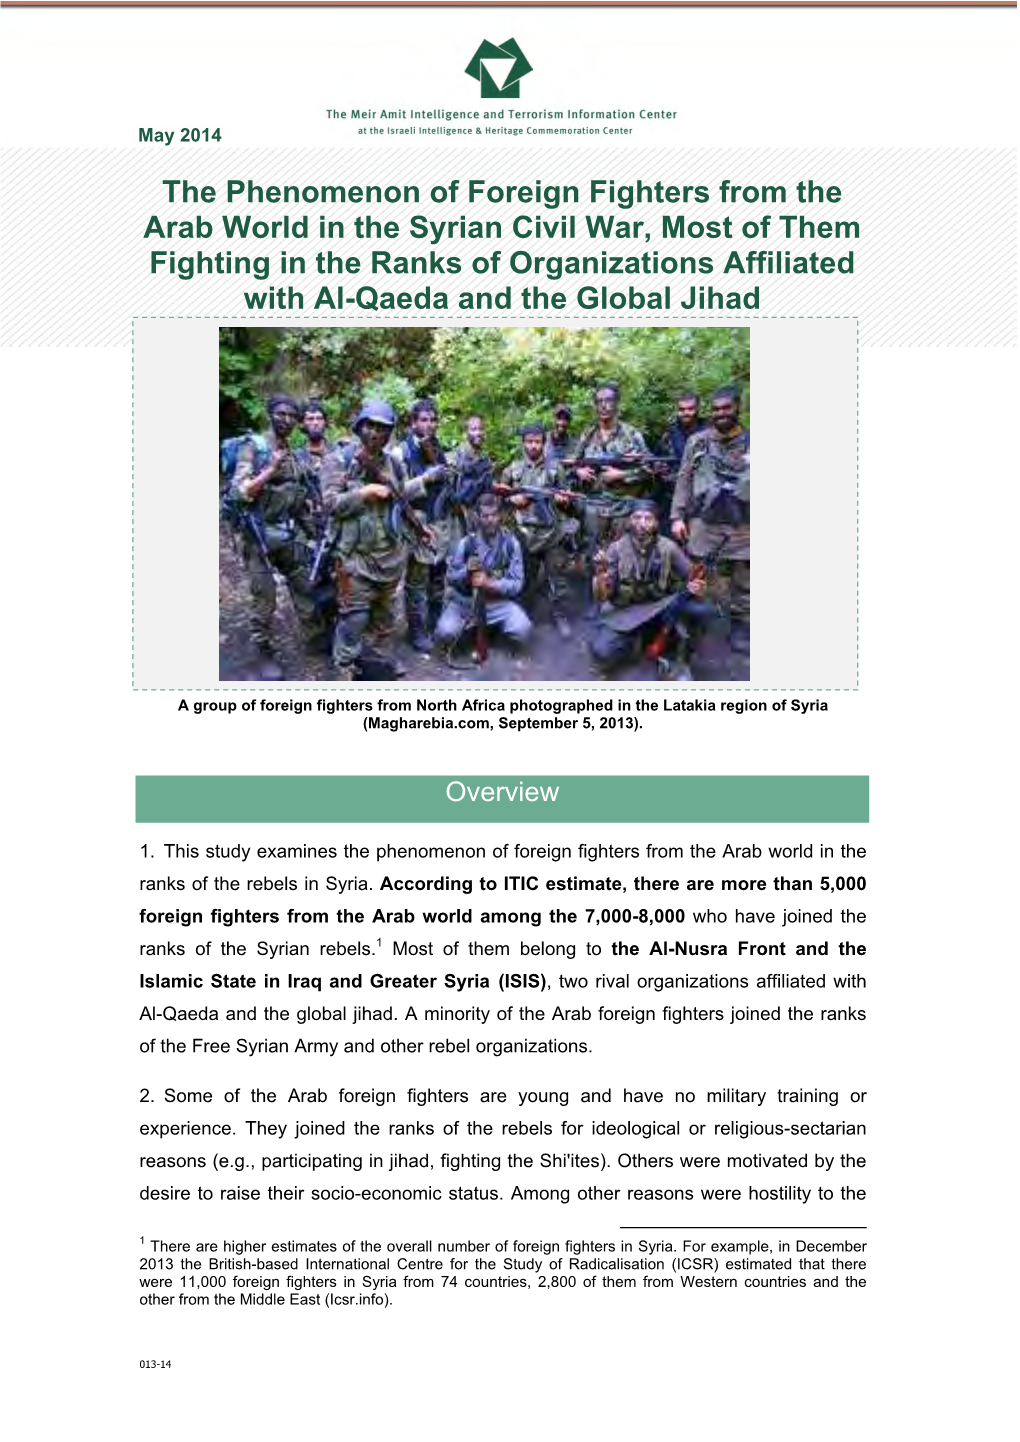 The Phenomenon of Foreign Fighters from the Arab World in the Syrian Civil War, Most of Them Fighting in the Ranks of Organizati